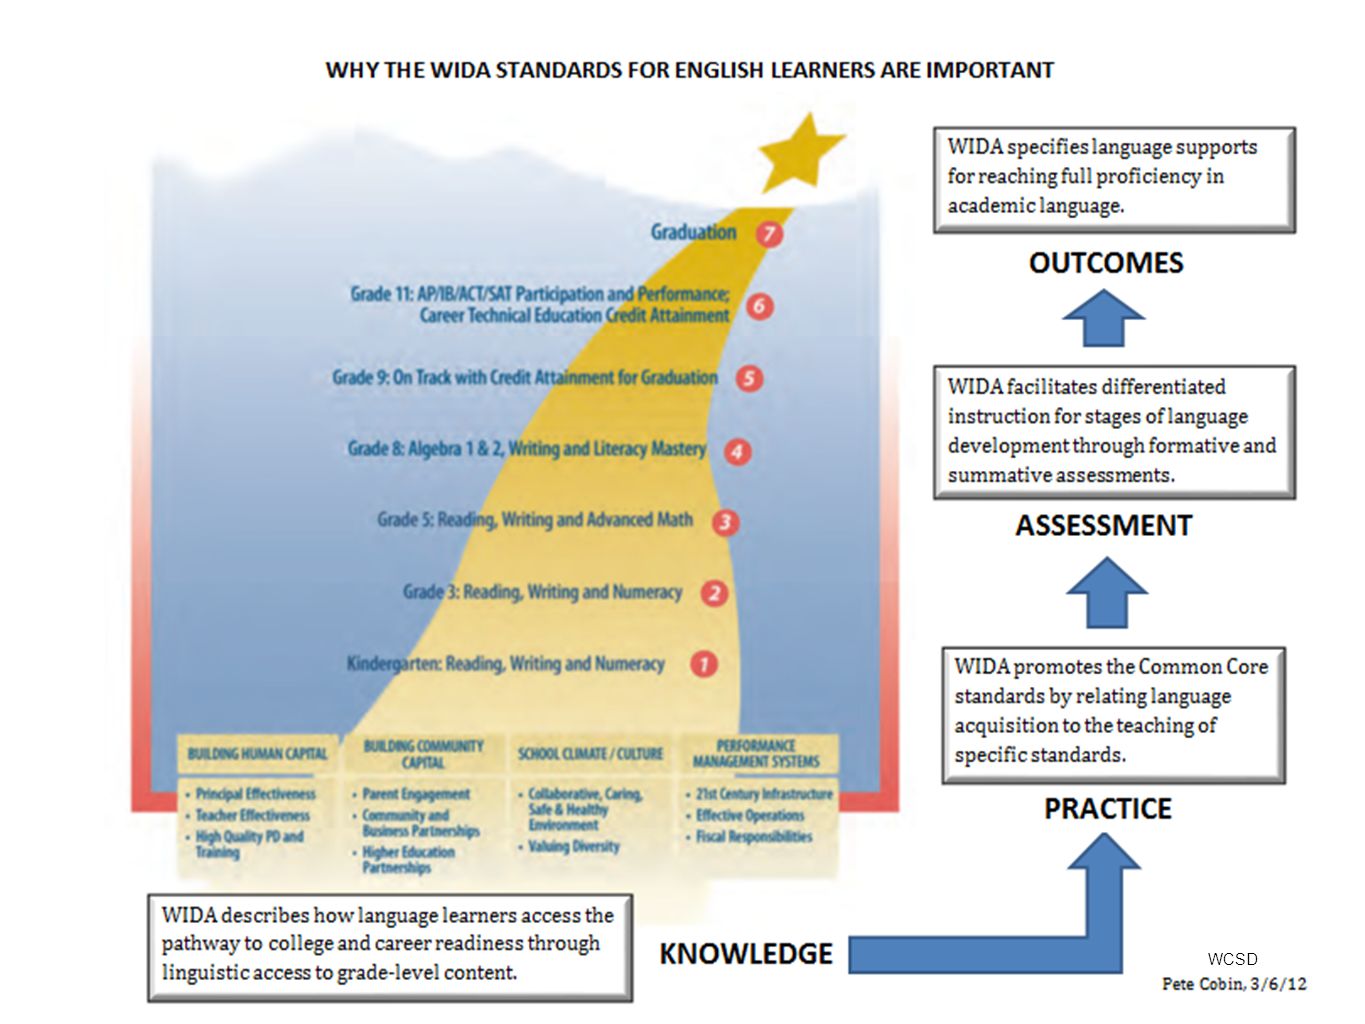 Show how WIDA supports the strategic plan and the pathway to assisting students to reach their graduation goal. We begin with the knowledge of how language learners on guided on this pathway to CCR through linguistic access at grade level content.